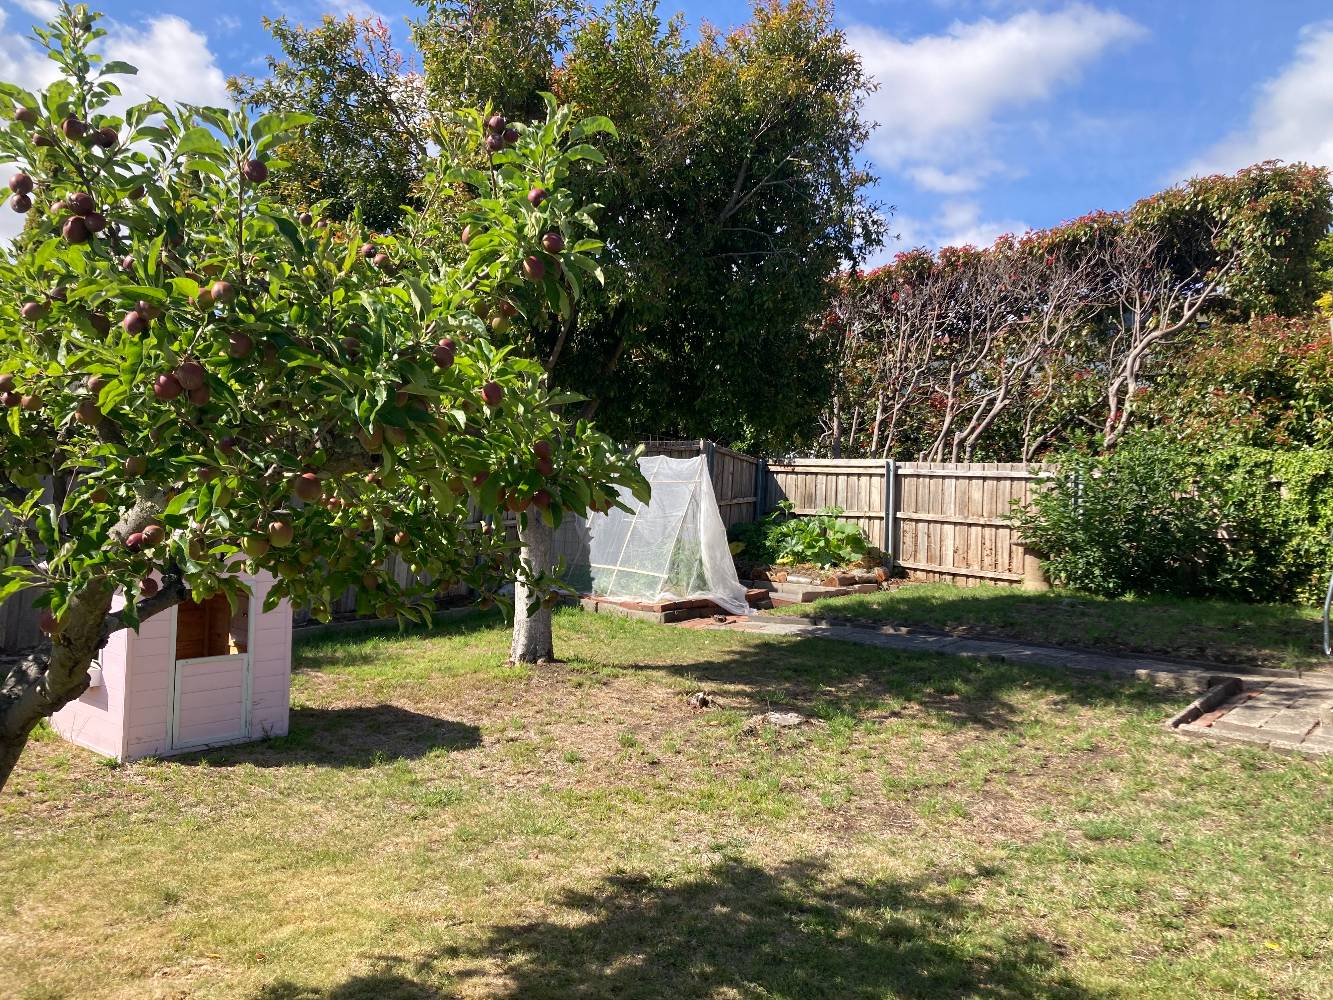 Backyard with vegie patch, trampoline and outdoor area